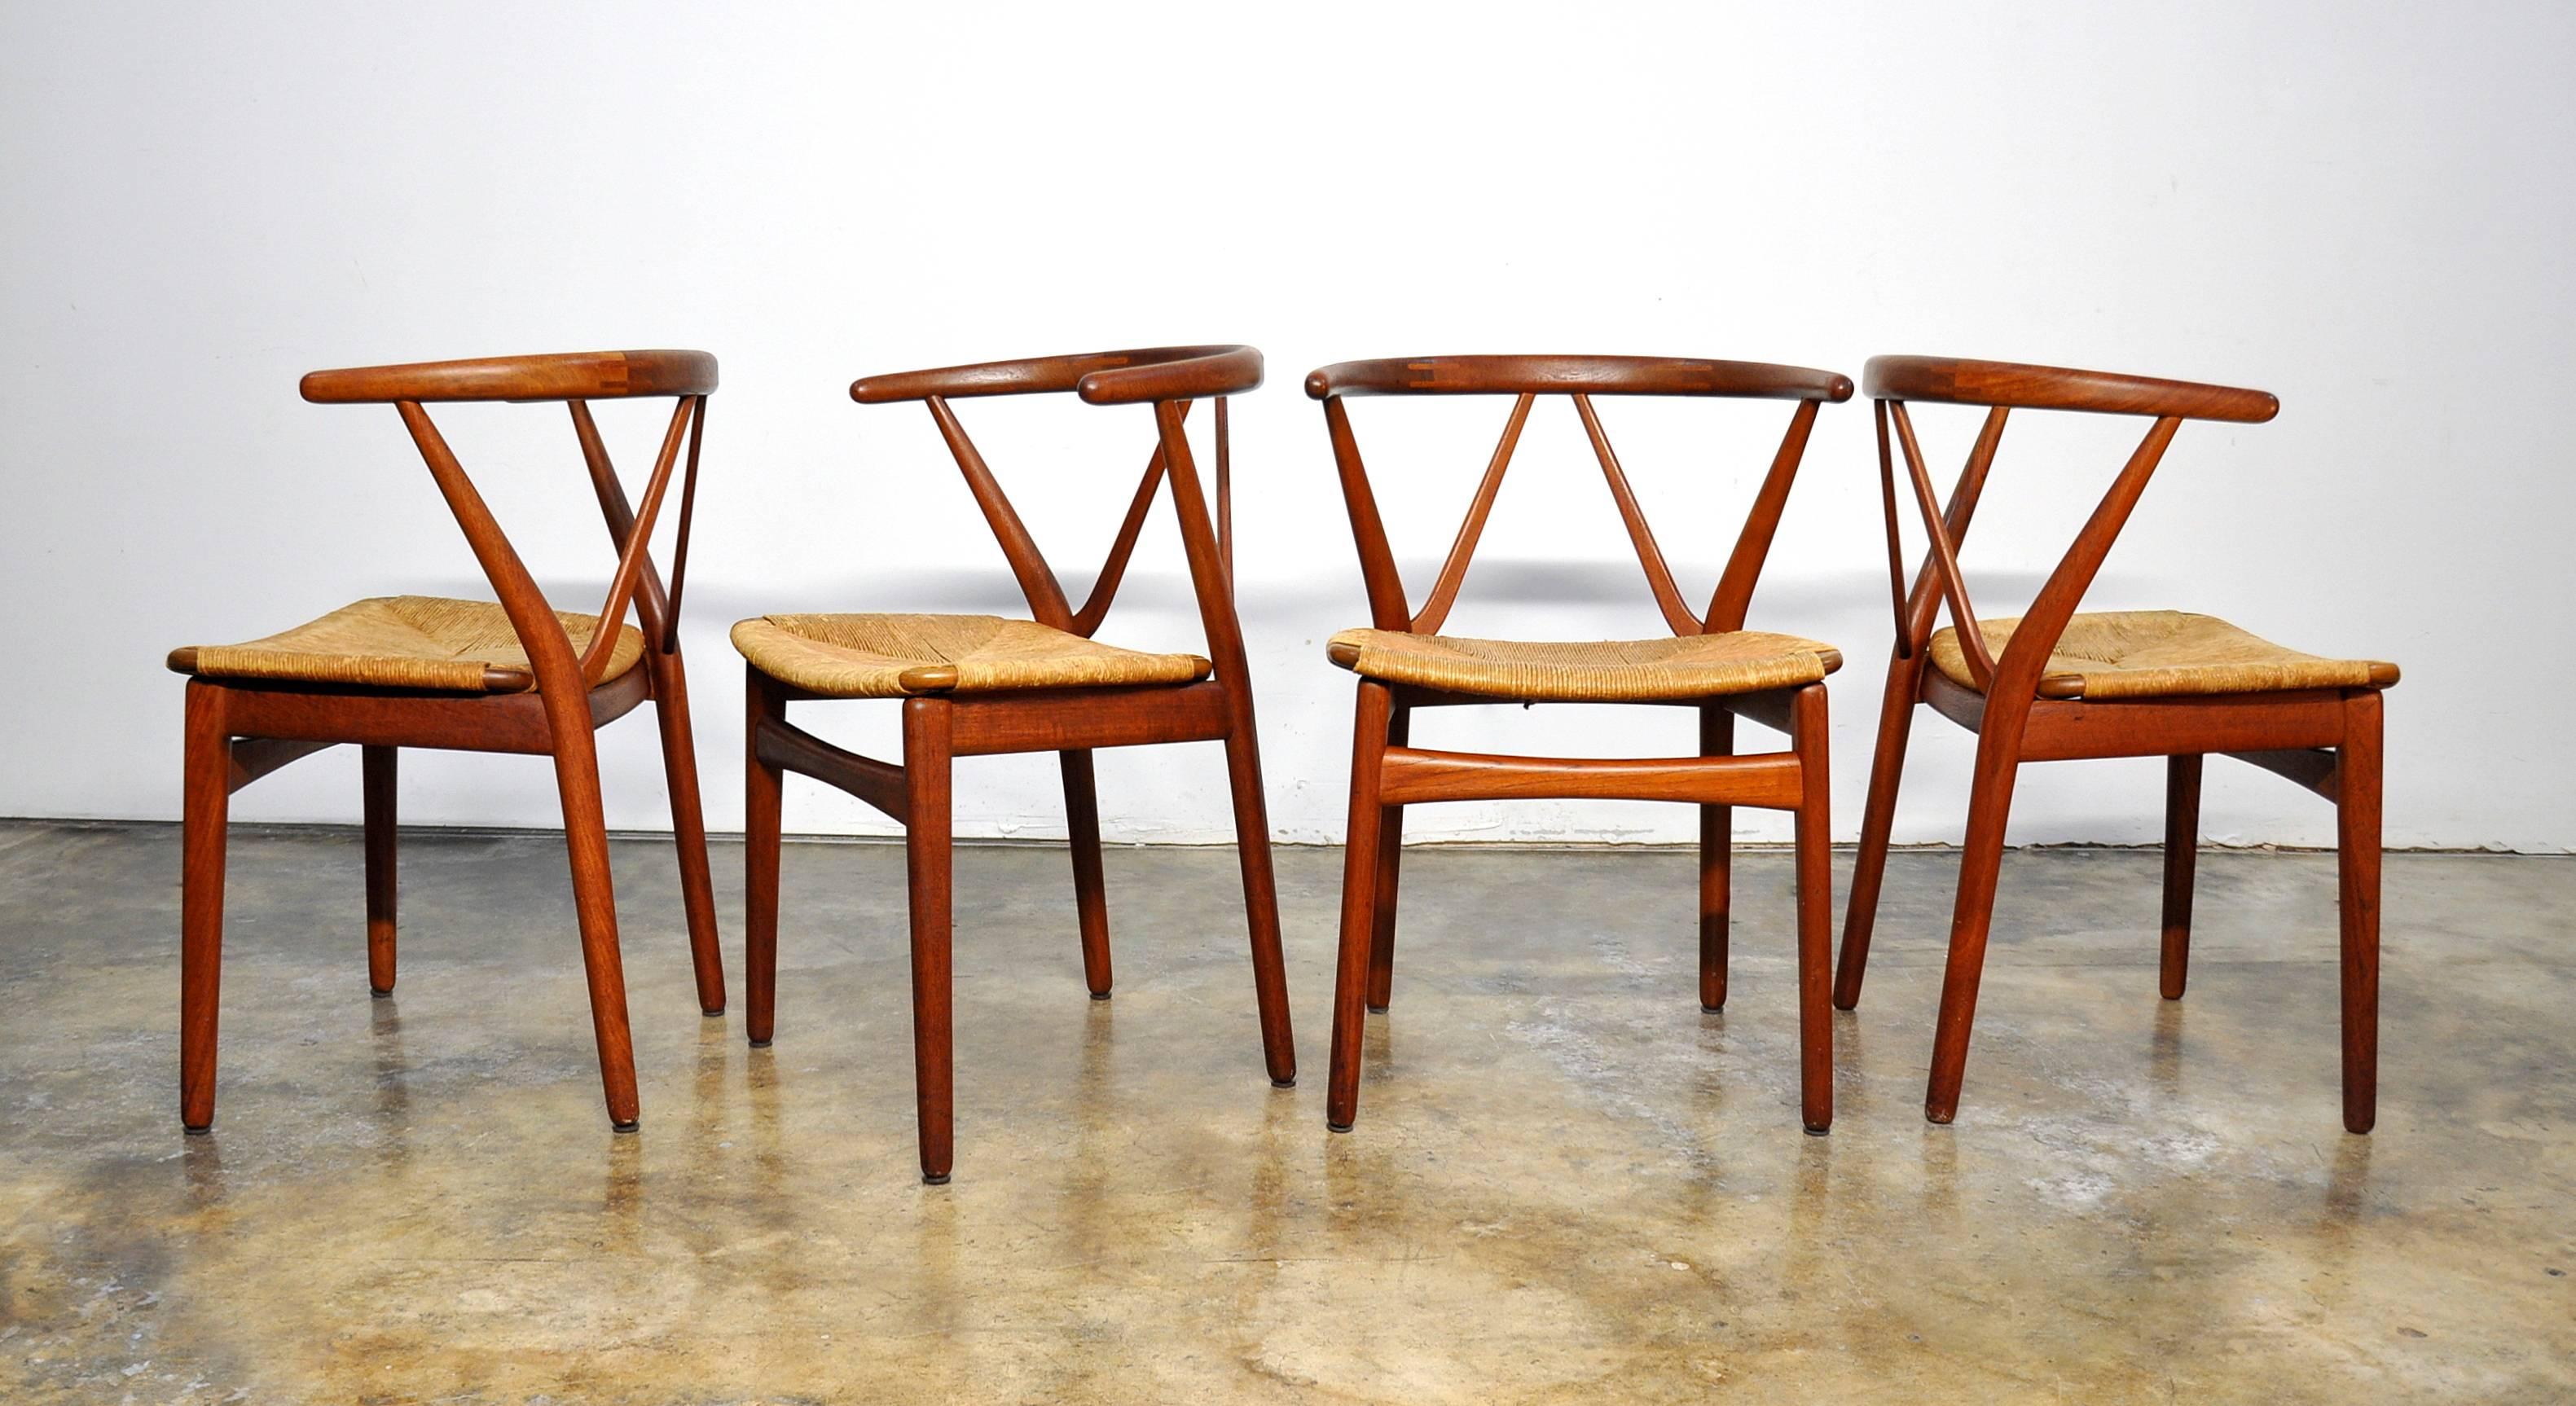 Rare set of all original mid-century Danish modern chairs with a remarkable design that looks truly outstanding from every angle. The chairs are vintage and date from the early 1960s. The curved backrests feature visible biscuit joints and provide a